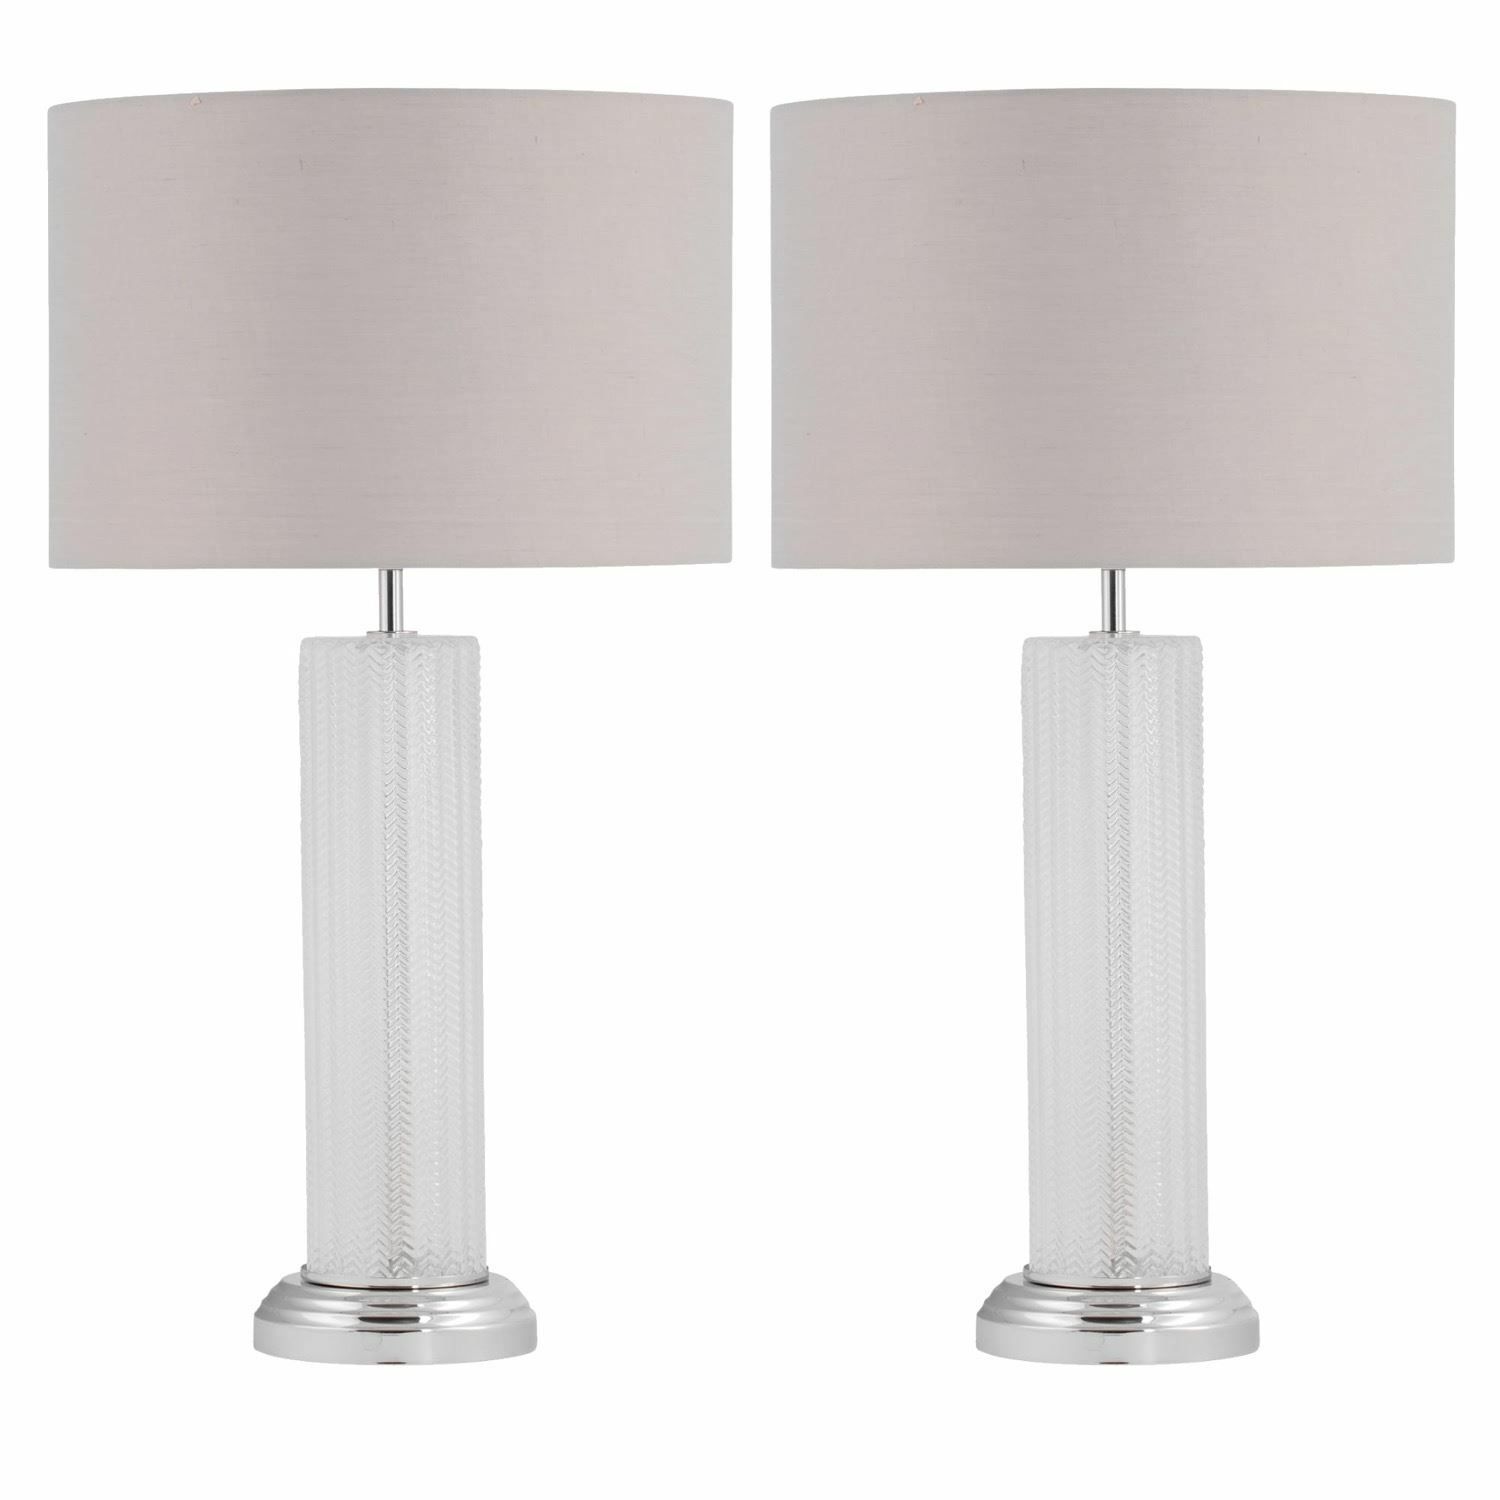 Set Of Modern 59cm Textured Glass Table Lamps Bedside Lights With Grey  Shades | Ebay For Grey Textured Floor Lamps (View 7 of 15)